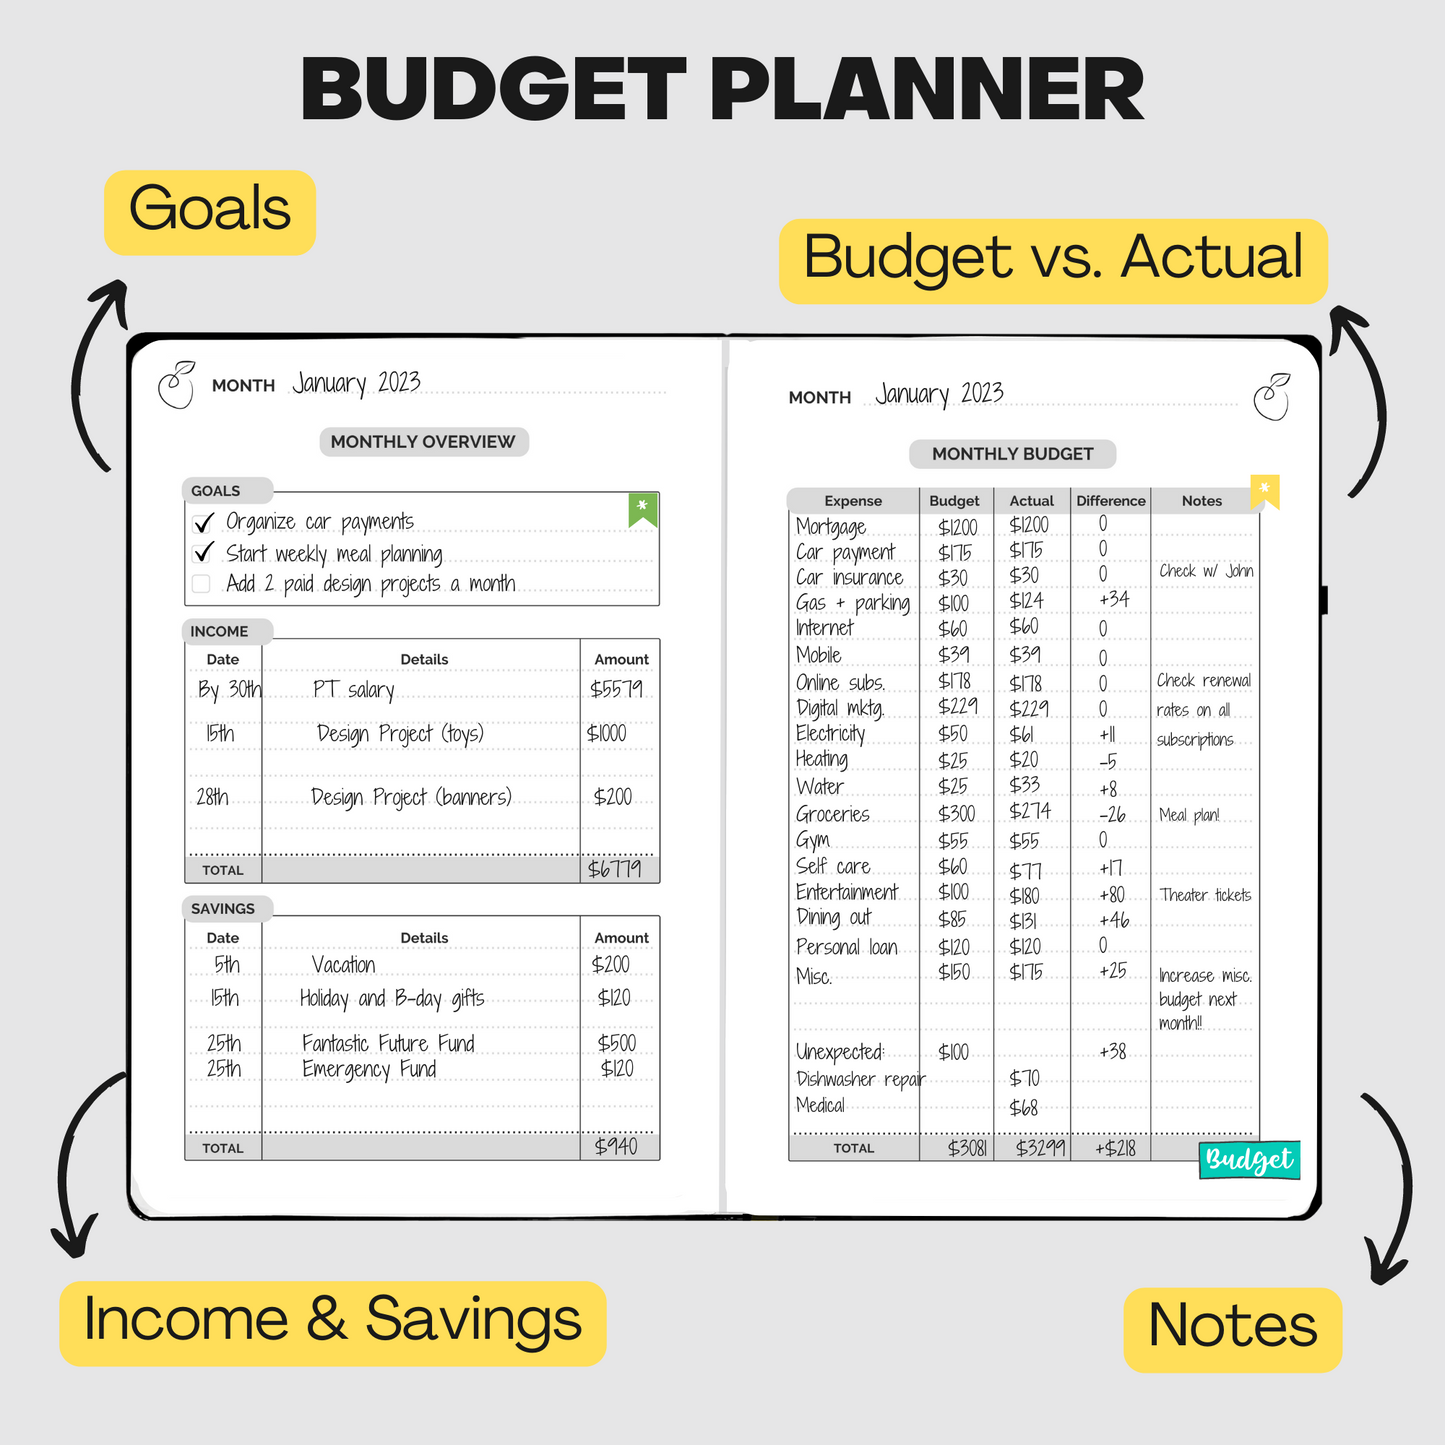 The Budget Planner